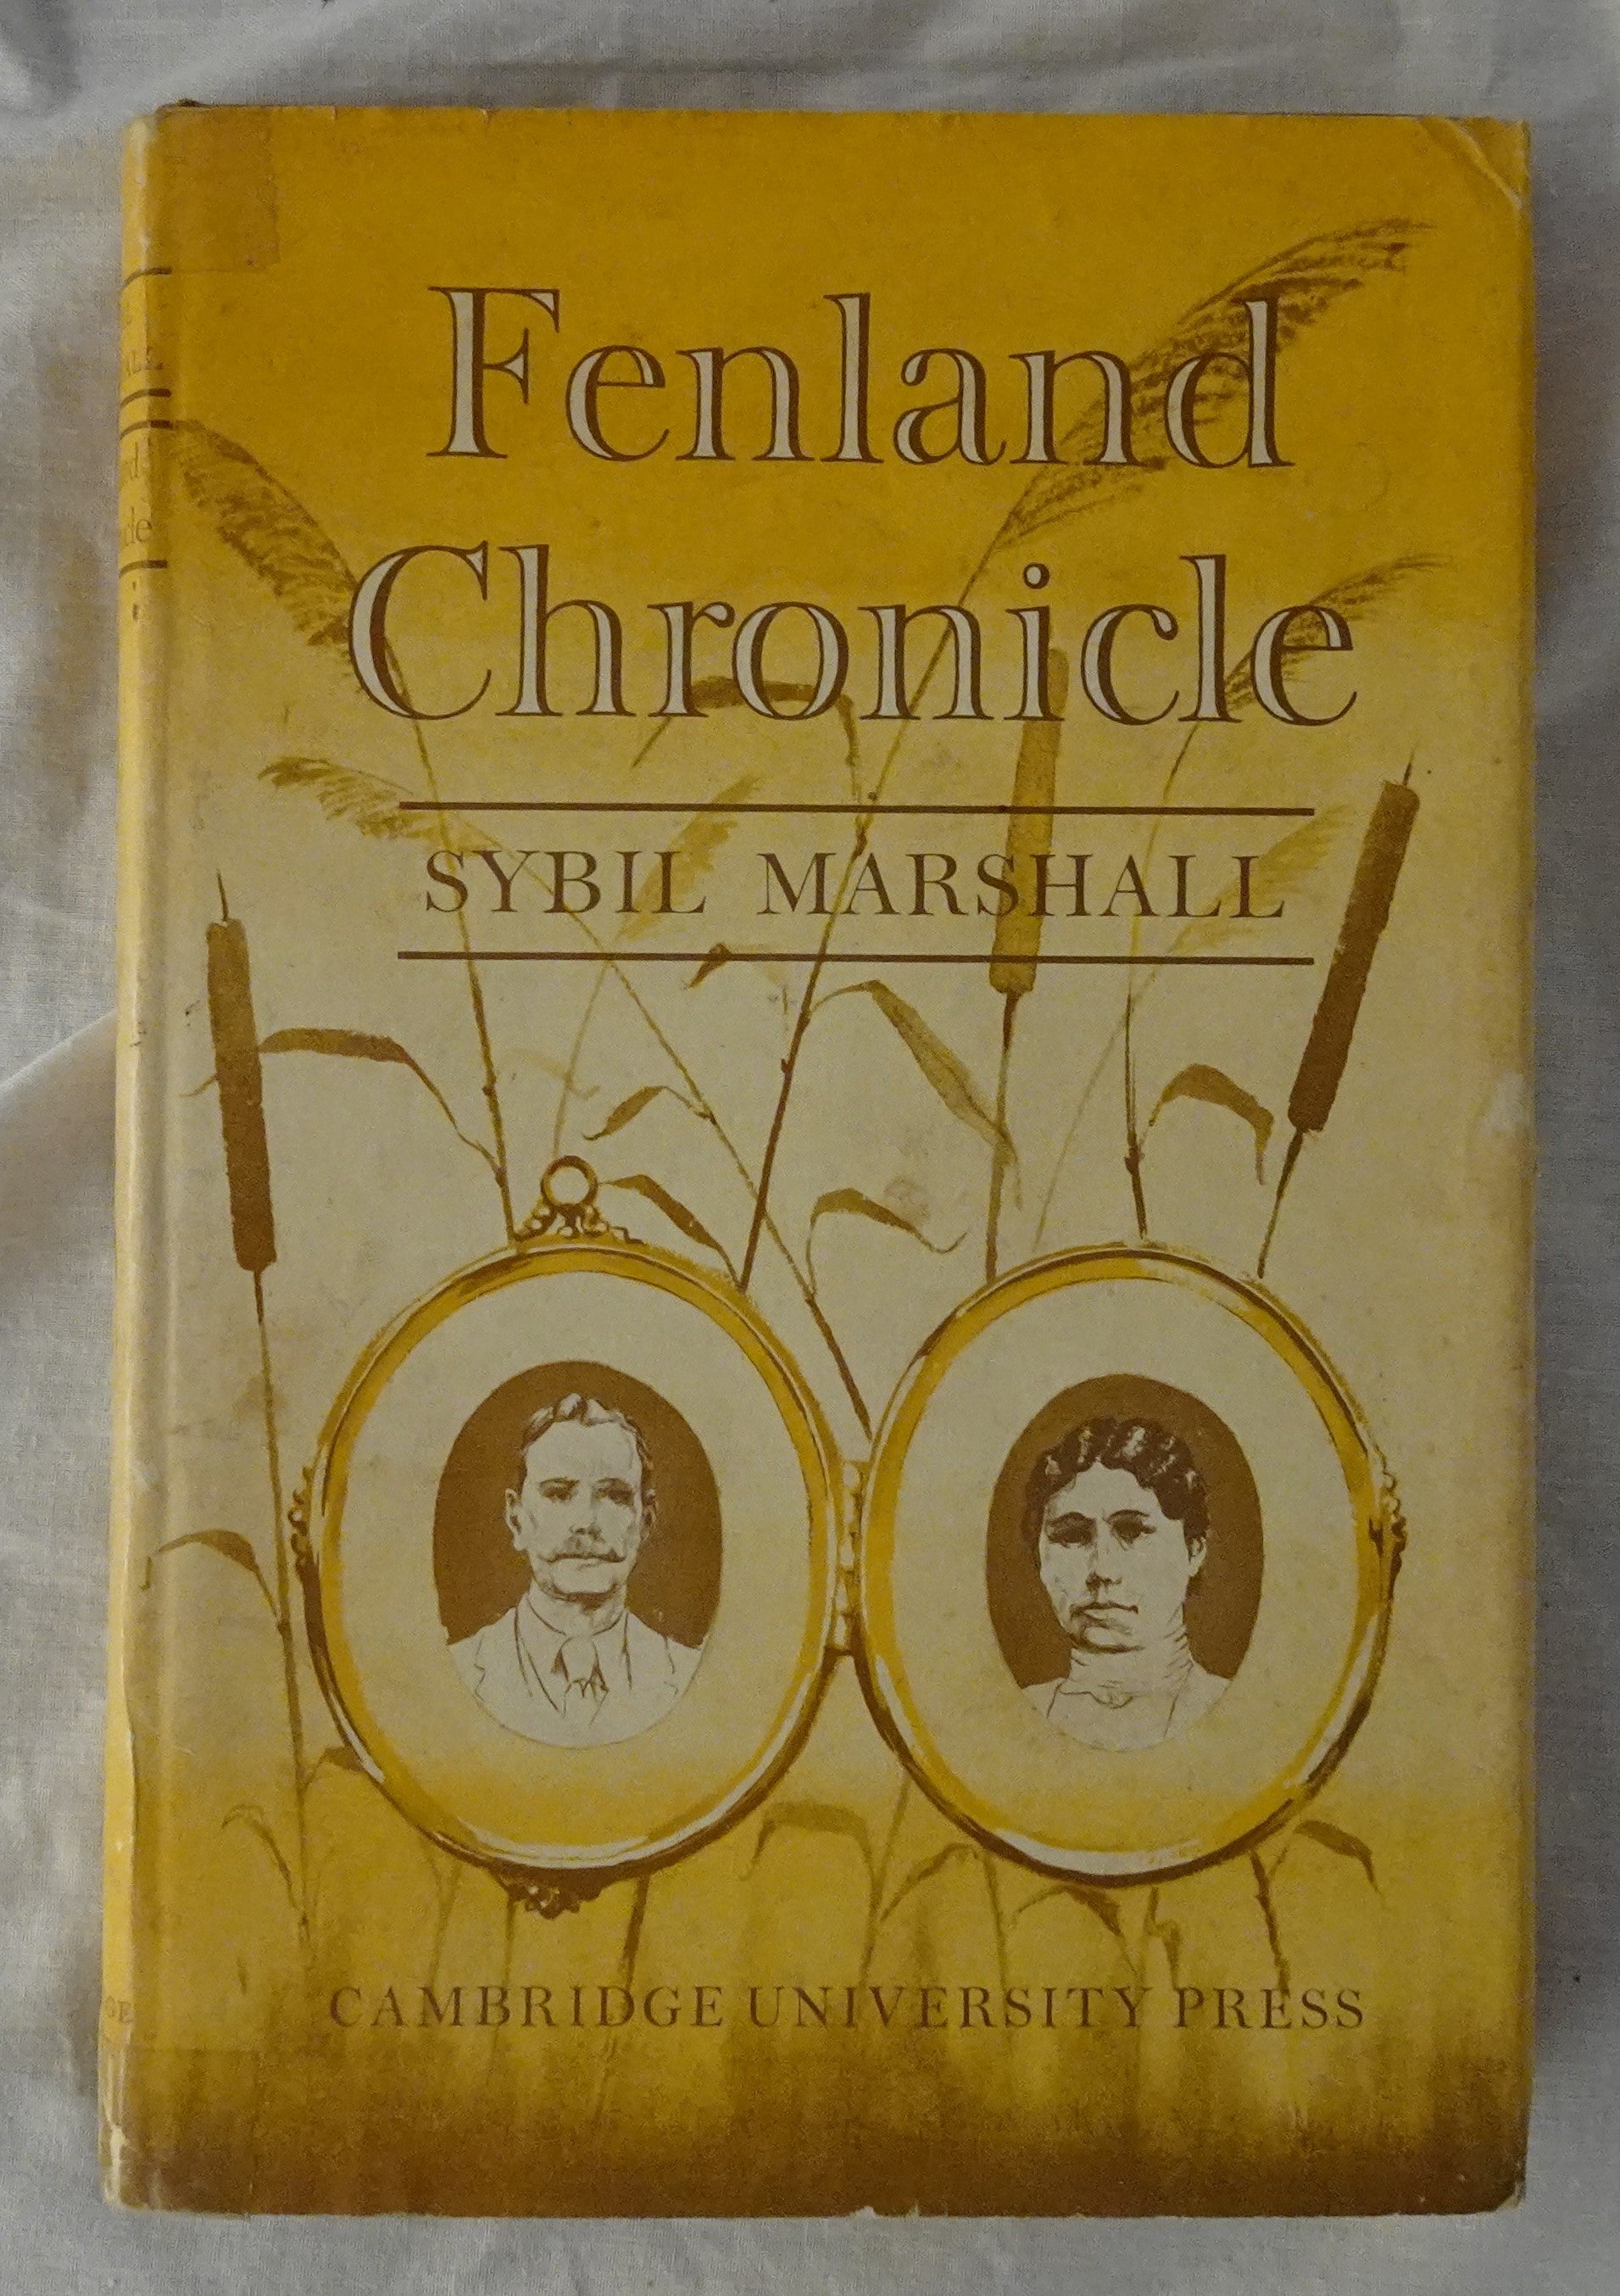 Fernland Chronicle  Recollections of William Henry and Kate Mary Edwards collected and edited by their daughter  by Sybil Marshall  drawings by Ewart Oakshott